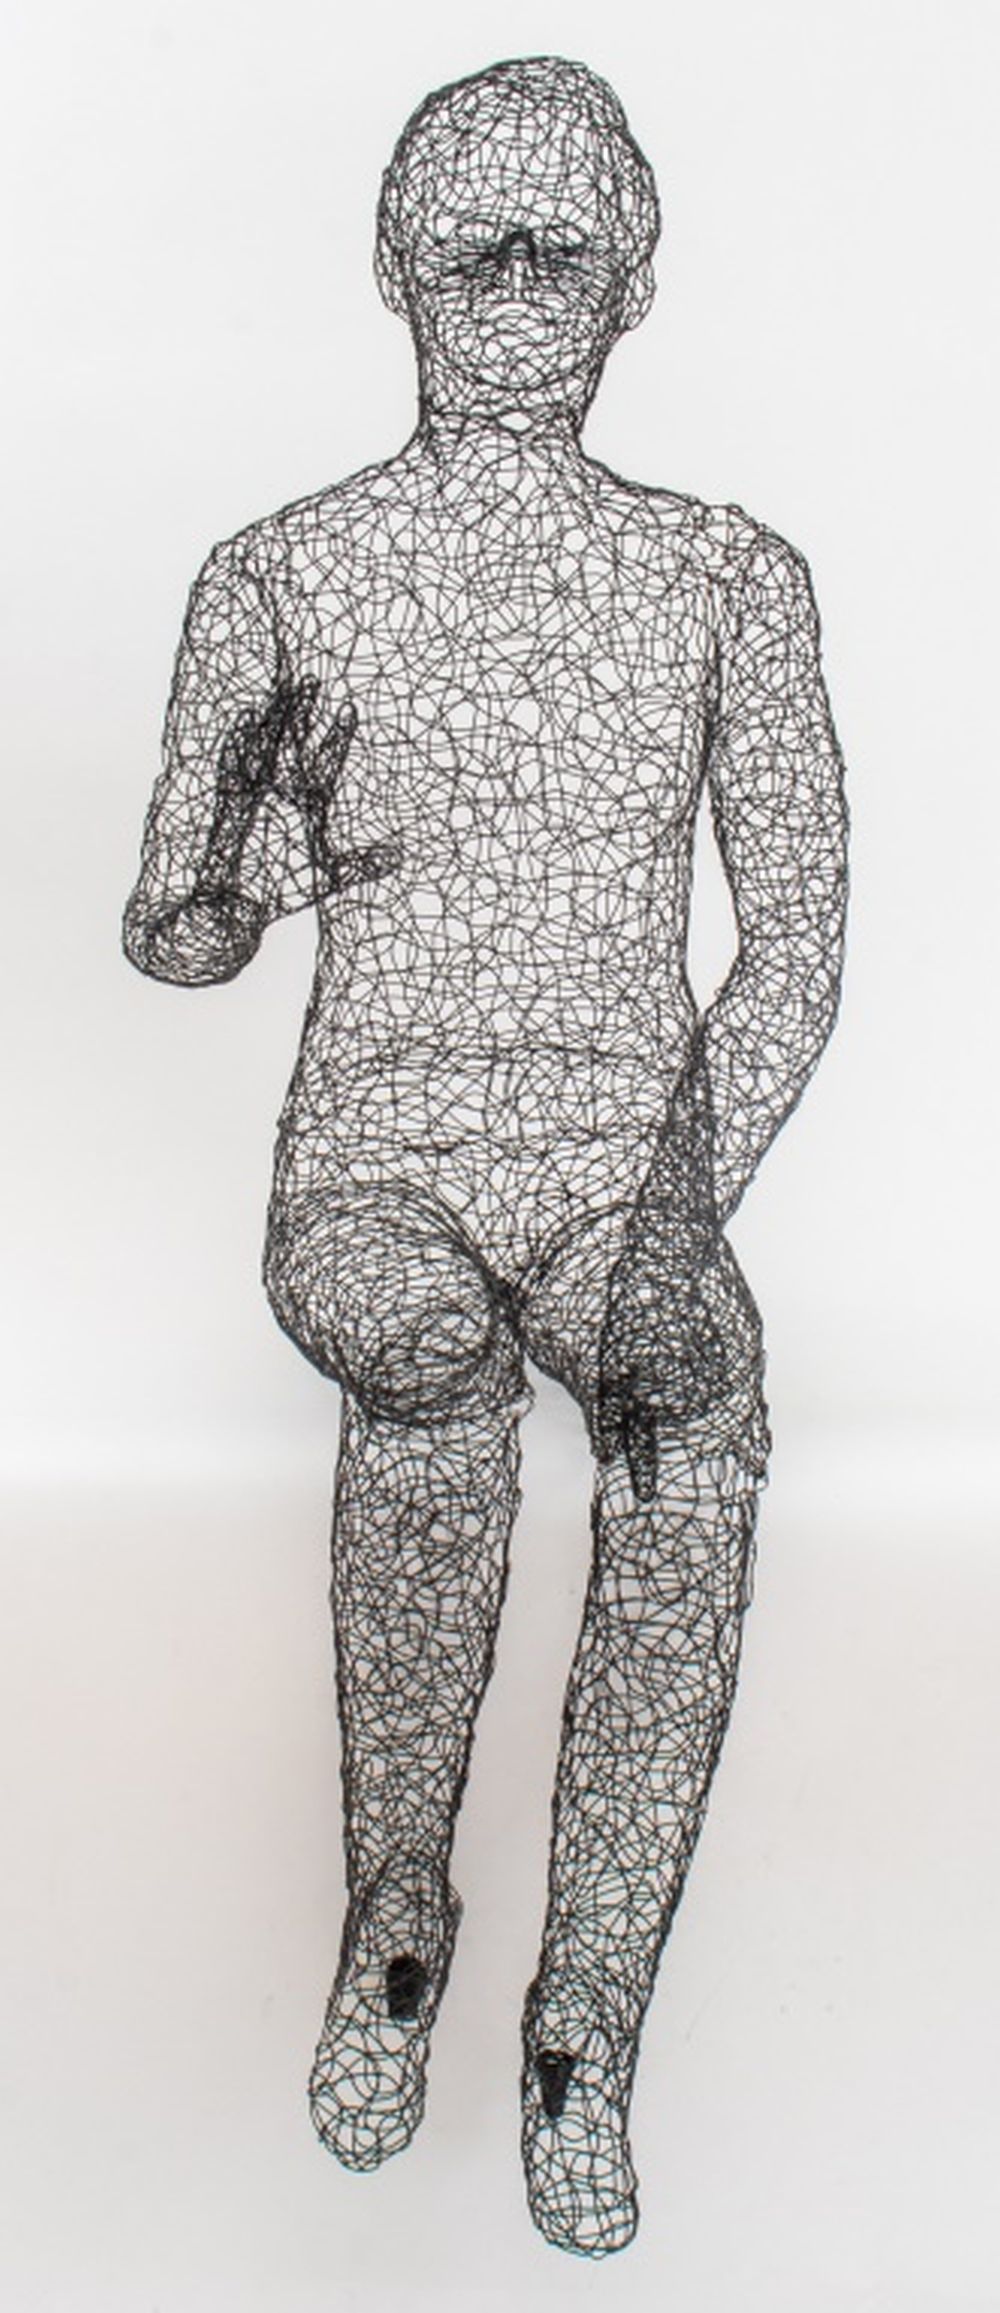 LIFE SIZED WIRE SCULPTURE OF SEATED